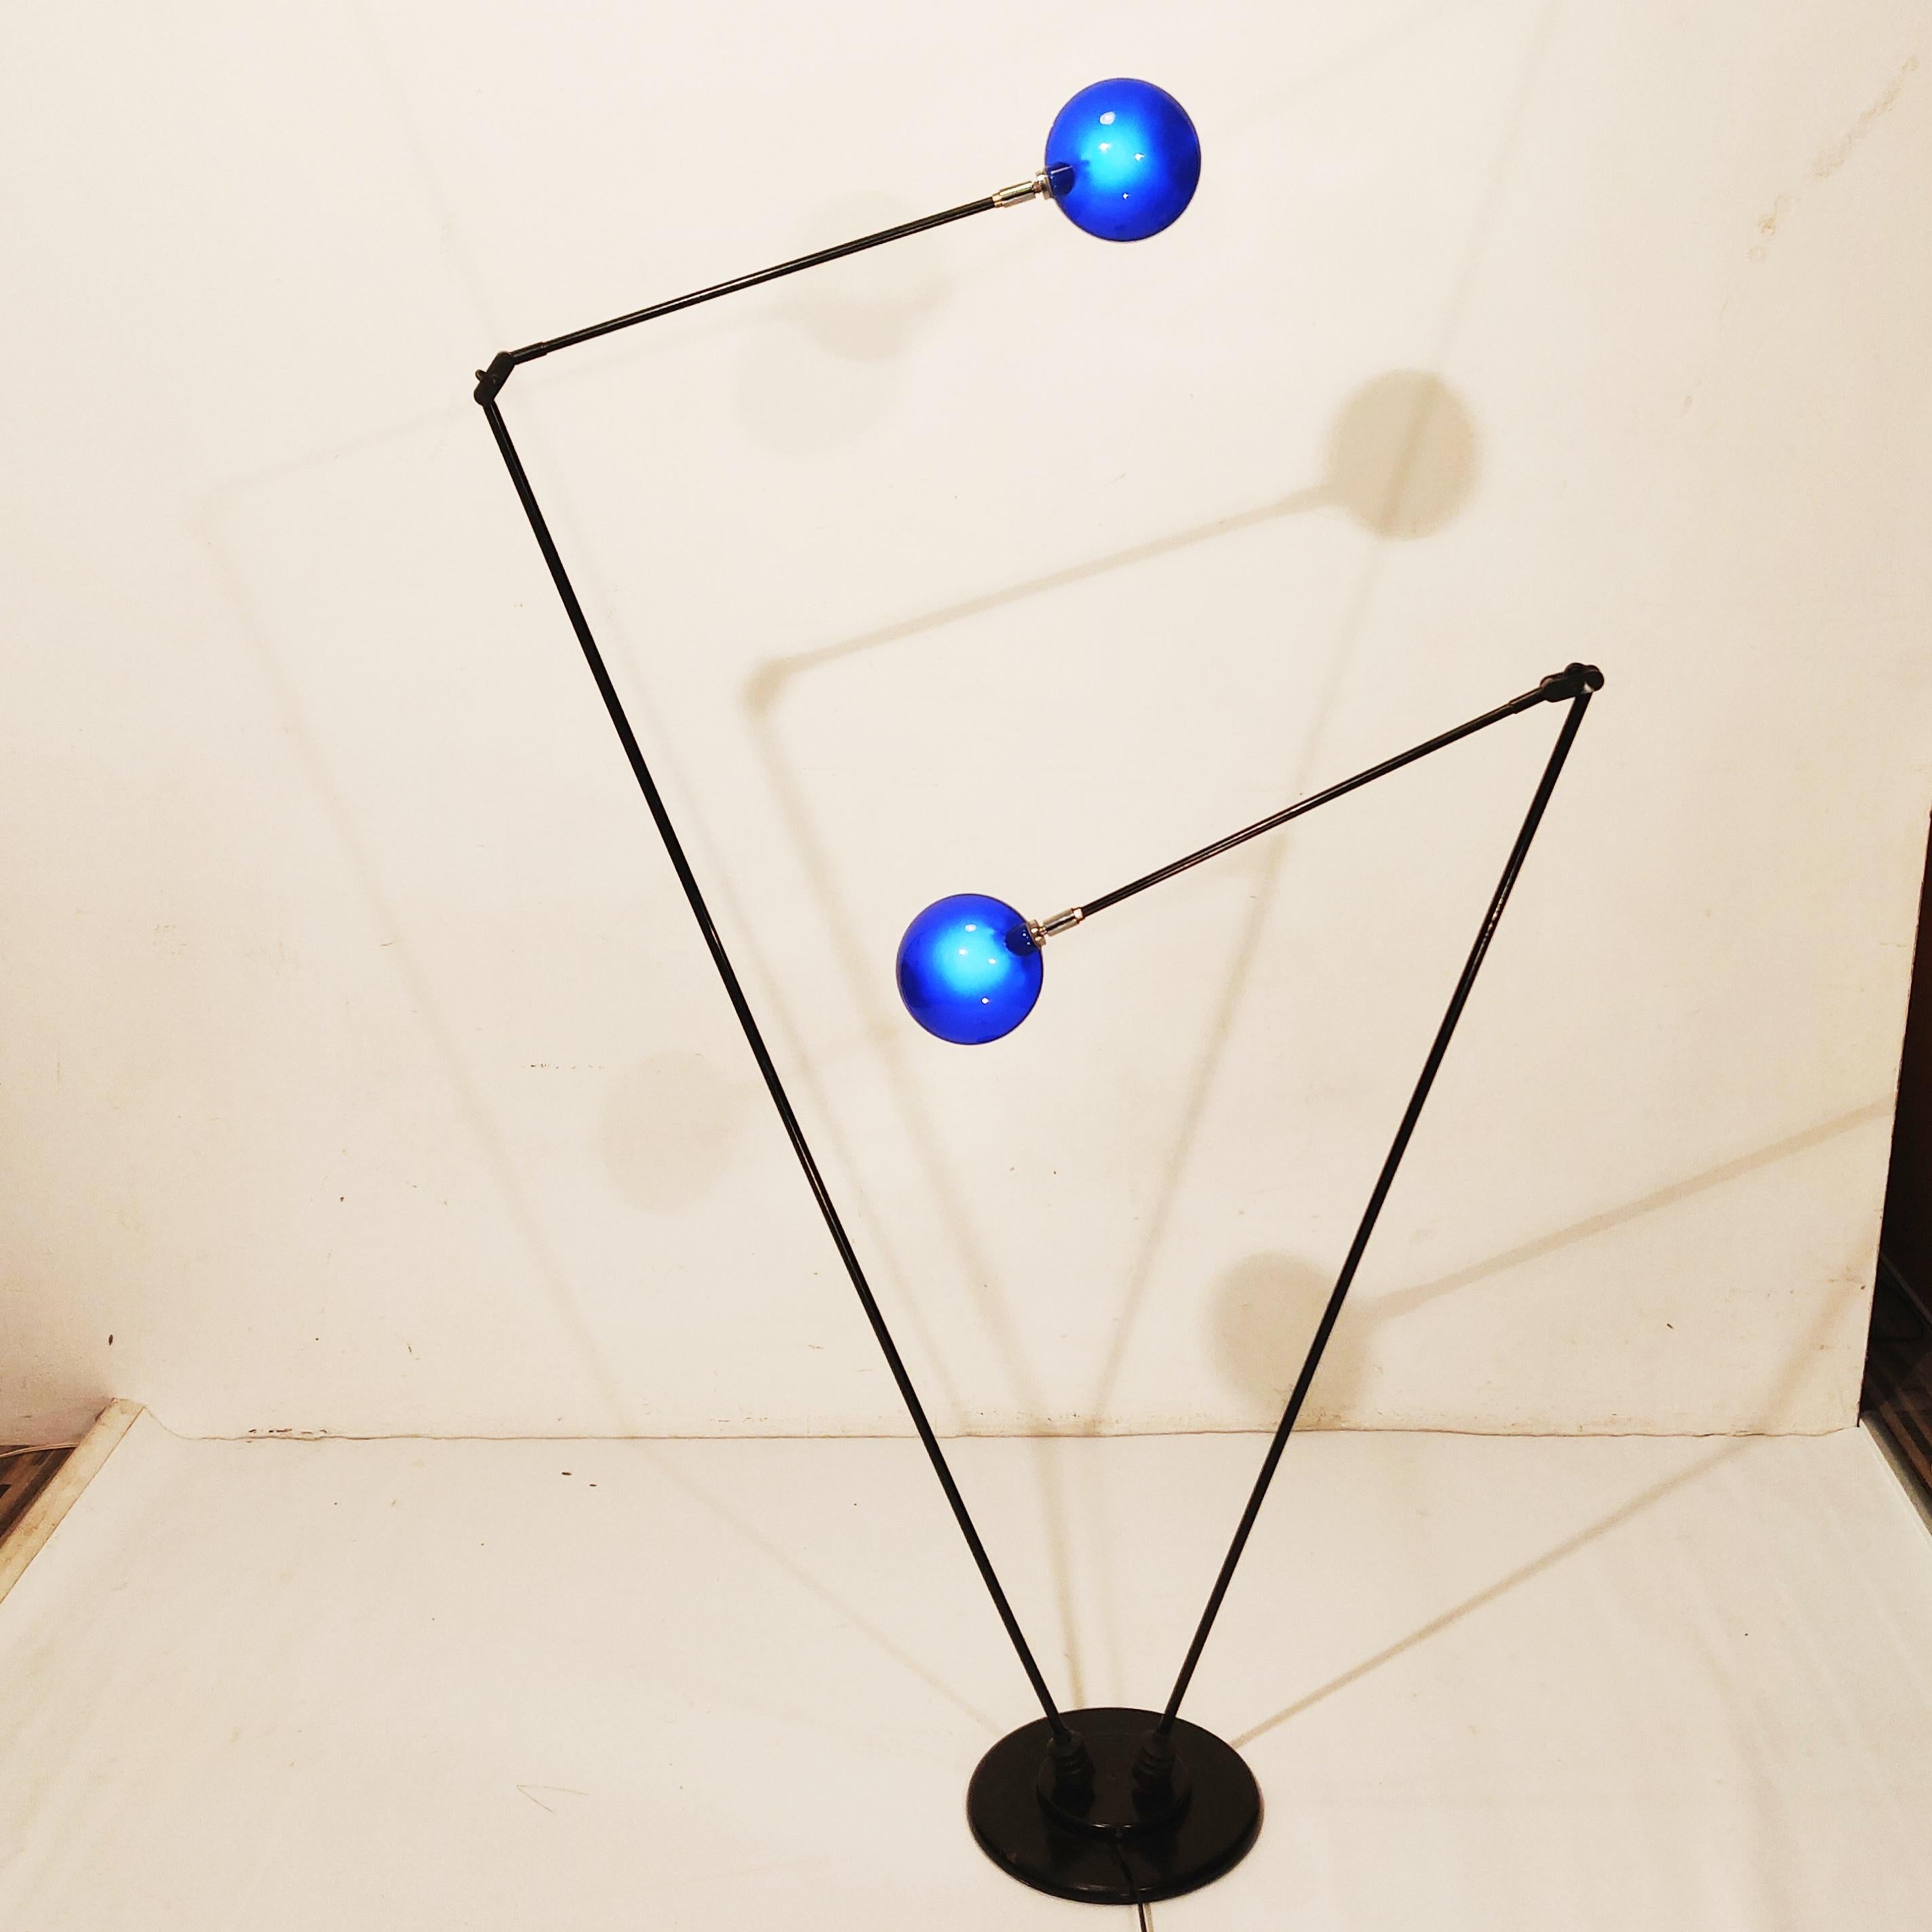 Minimalistic dutch Design floor lamp by Pola Design Amstelveen, 1980s.
Arms are movable in any directions, the shade's are made of blue frosted round glass. These round shape of blue frosted glass is rare, most of the Pola design floor lamps have